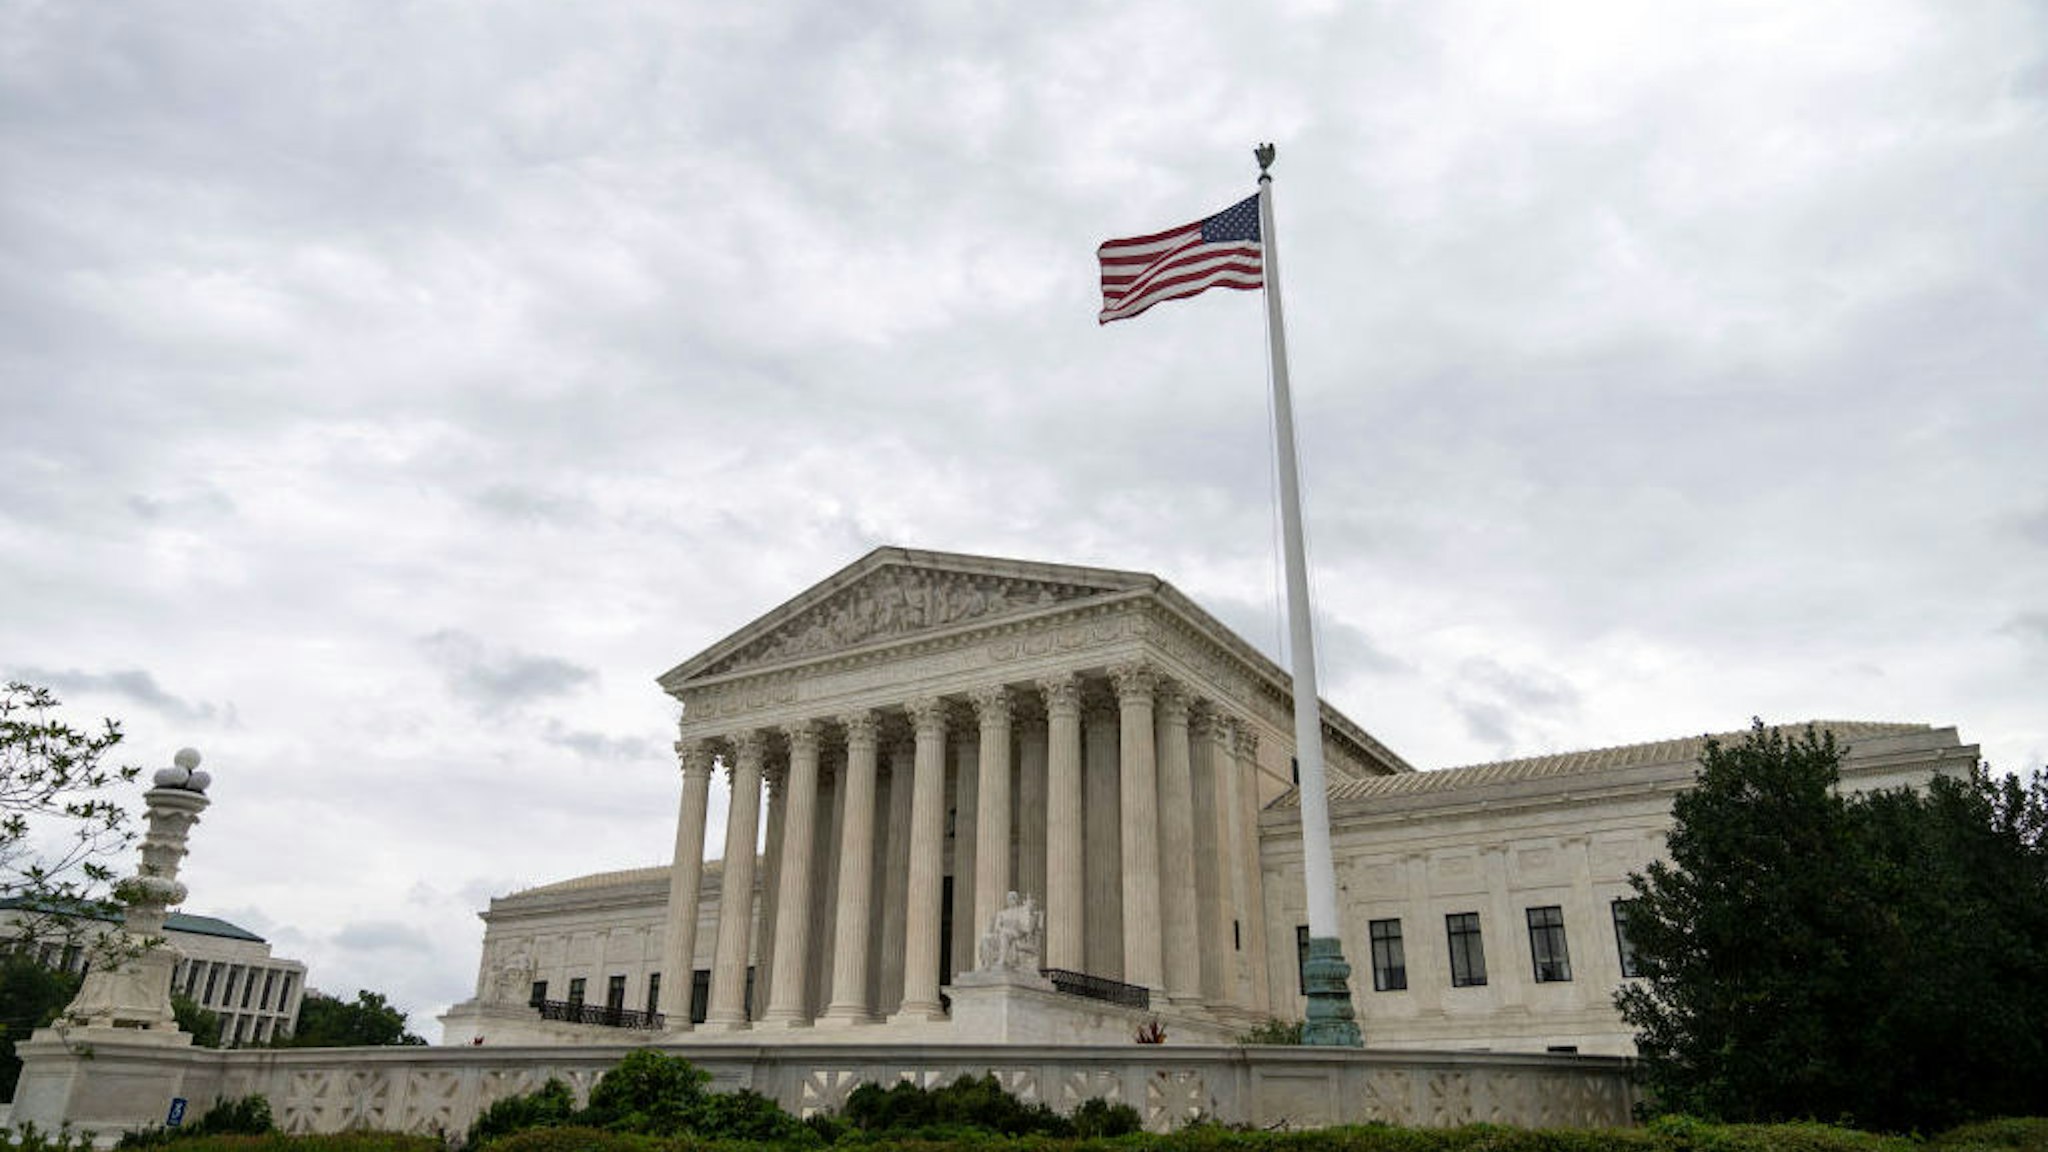 WASHINGTON, DC - SEPTEMBER 01: A view of the U.S. Supreme Court on September 1, 2021 in Washington, DC. A new Texas law that prohibits most abortions after six weeks of pregnancy went into effect on Wednesday. The U.S. Supreme Court did not act on a request to block the law. (Photo by Drew Angerer/Getty Images)